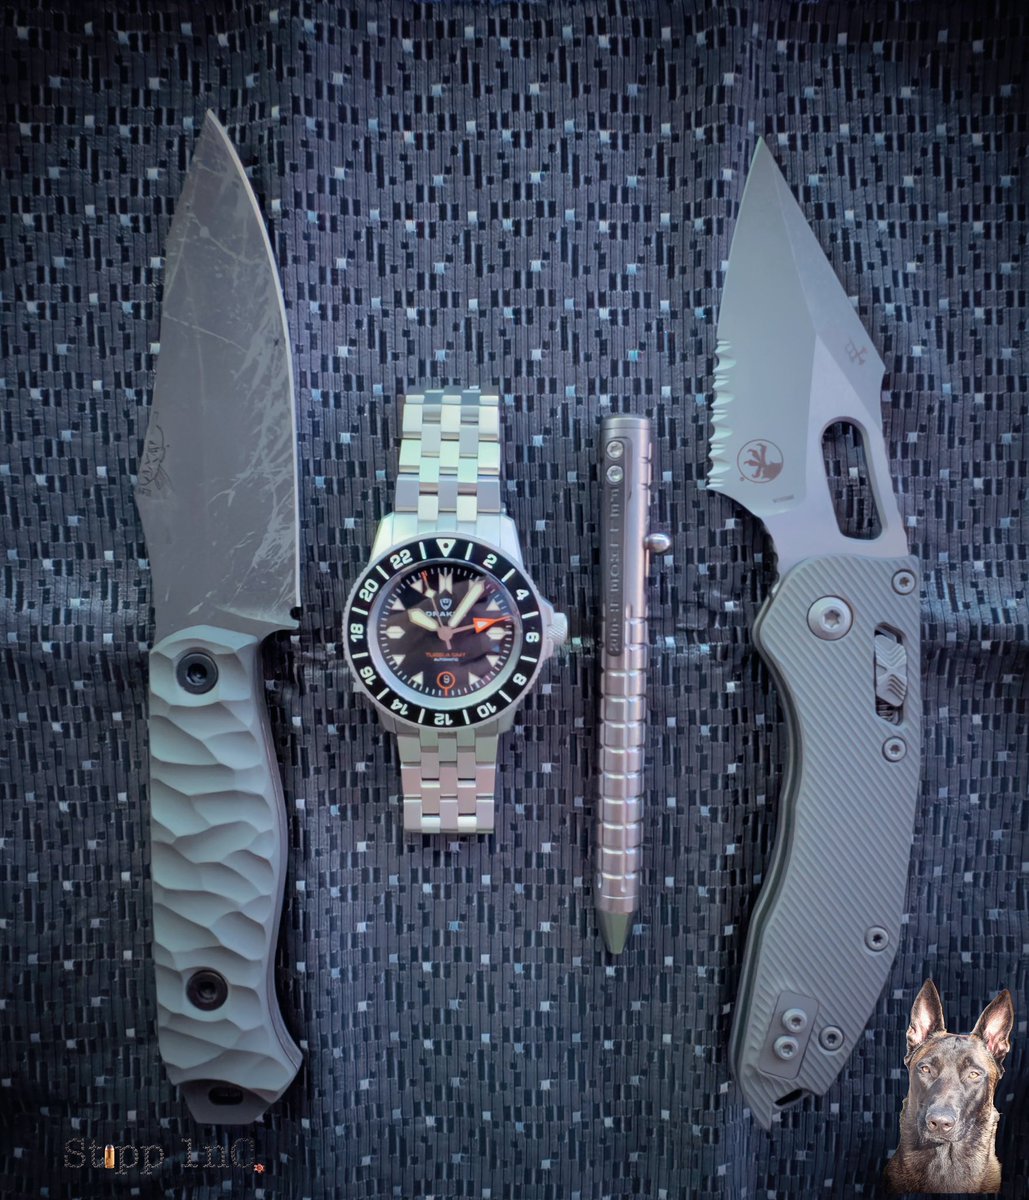 For you regular M-F folks have a great weekend. Be safe. Stay sharp.  #sharpasfuck #staysharp #knifeporn   #americanmade #honor #protect    #huntkilleat #americanmade #american #veteranowned #knife #everydaycarry #handmade #honor  #knifecommunity #veteranbuilt #customknives